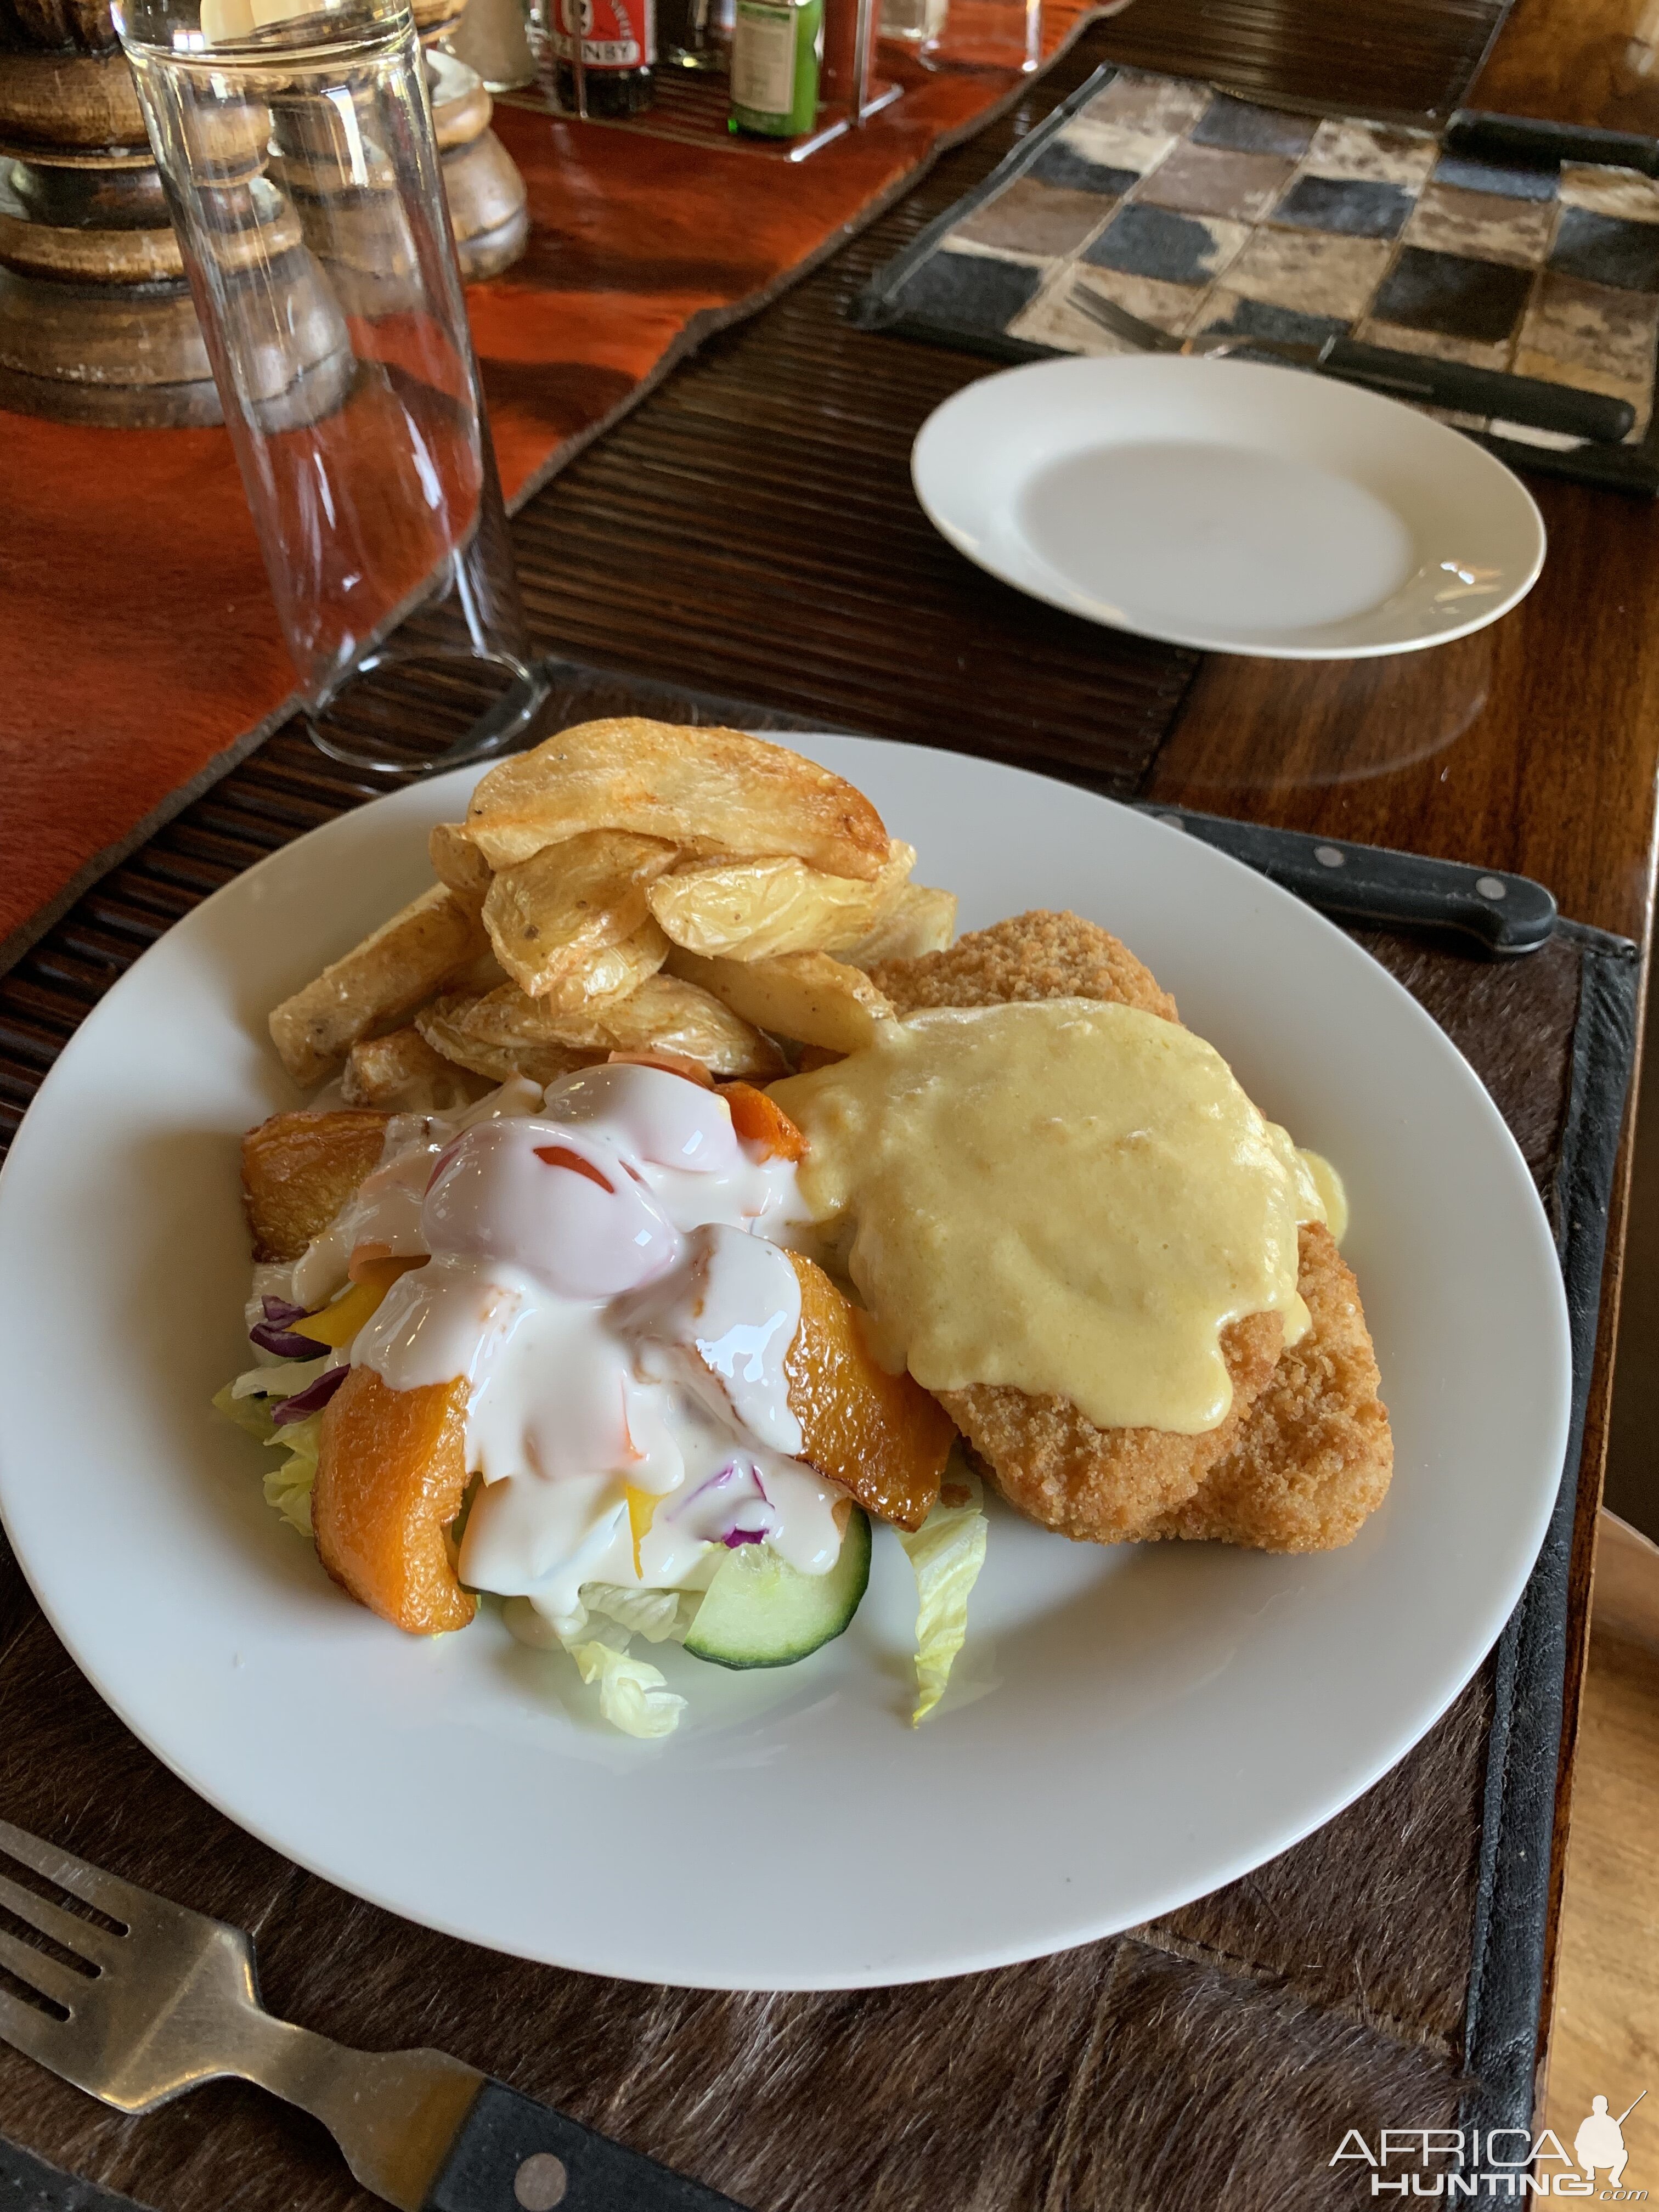 Breaded chicken cutlet, pommes frites, salad with buttermilk dressing